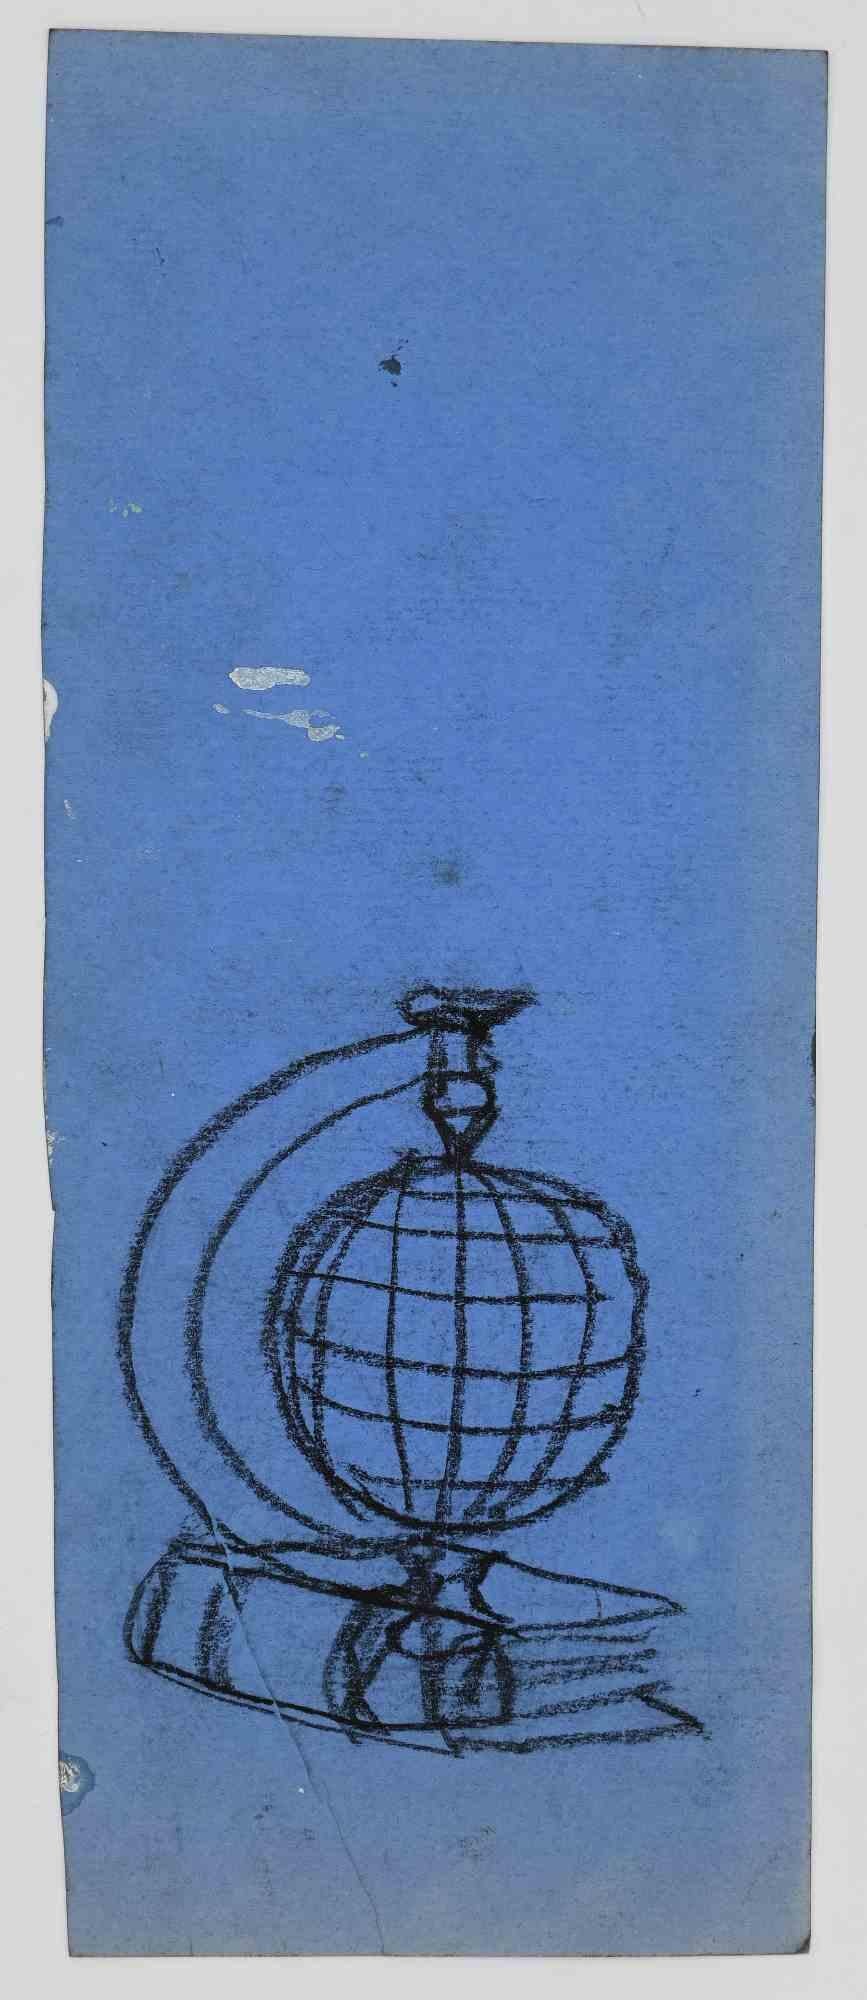 Calendar of the World is an original Charcoal, Tempera and white lead  realized by Mino Maccari in 1930/1940s.

Good condition on a blue cardboard.

Hand-signed by the artist with pen.

Mino Maccari (1898-1989) was an Italian writer, painter,